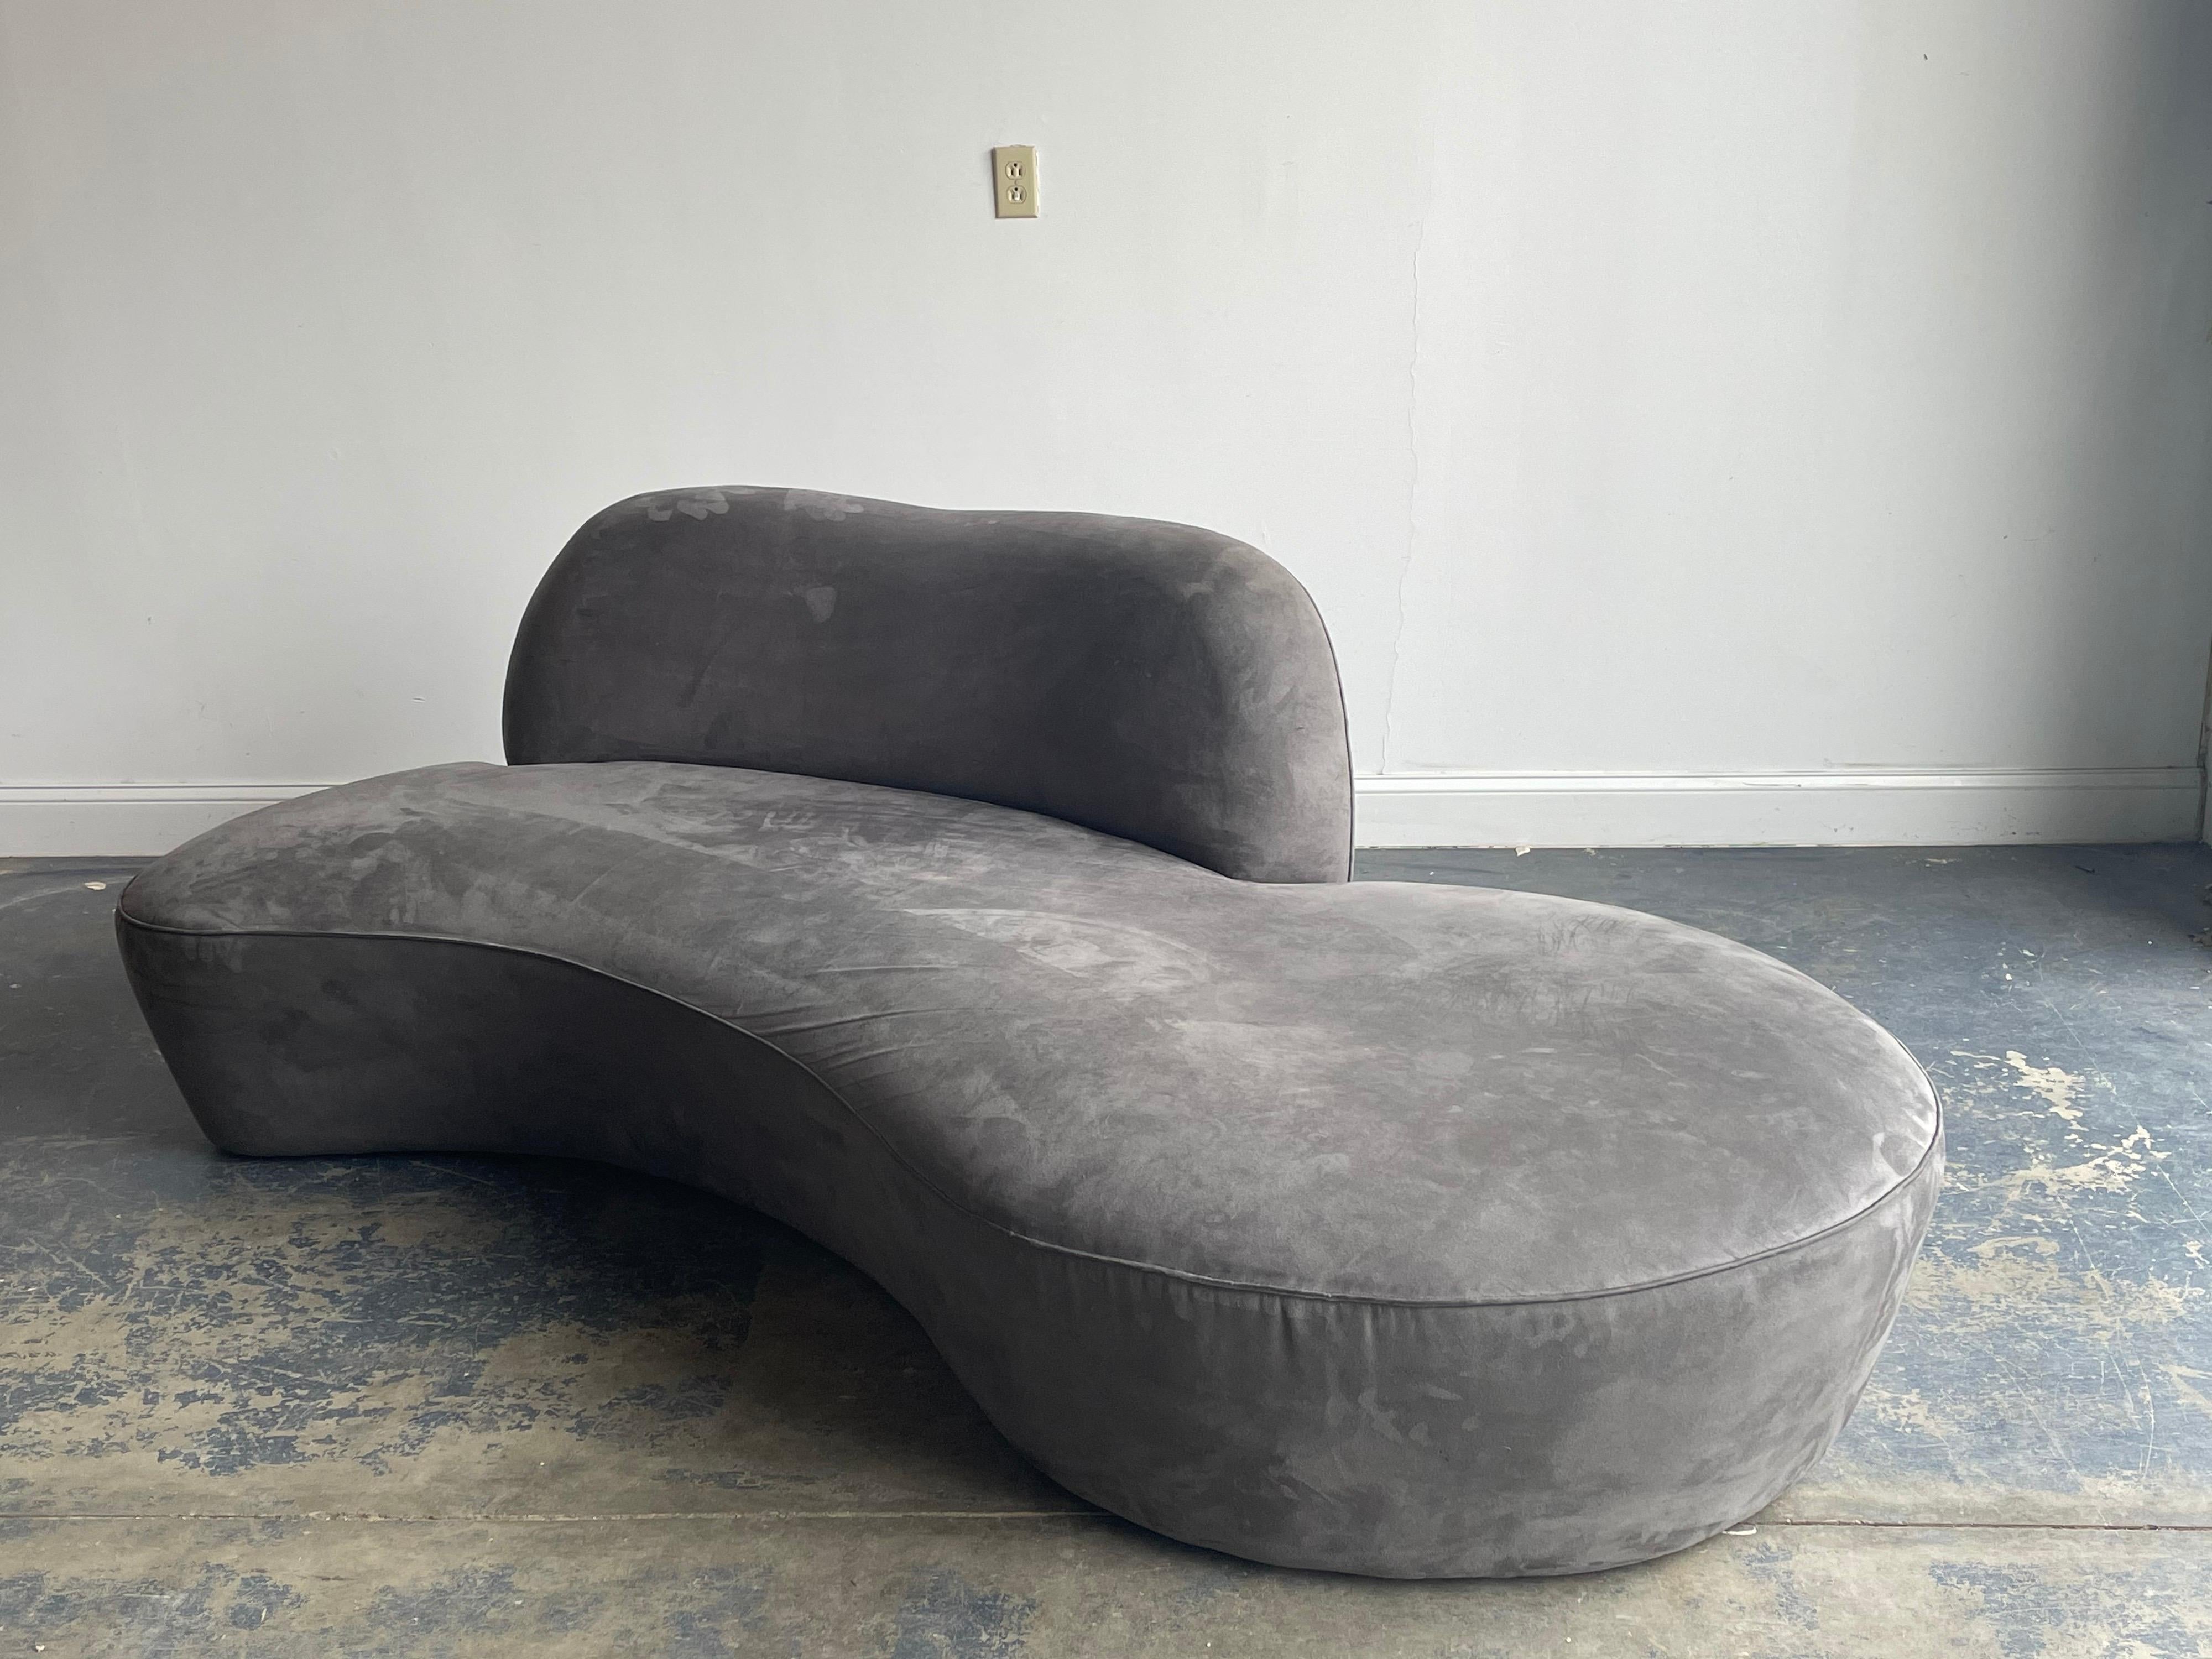 Organic modernist sofa by Vladimir Kagan. Original upholstery is free of any major blemishes but does show signs of wear, such as areas that show more use. 

Would work well in a variety of interiors and blend with other designers such as Edward